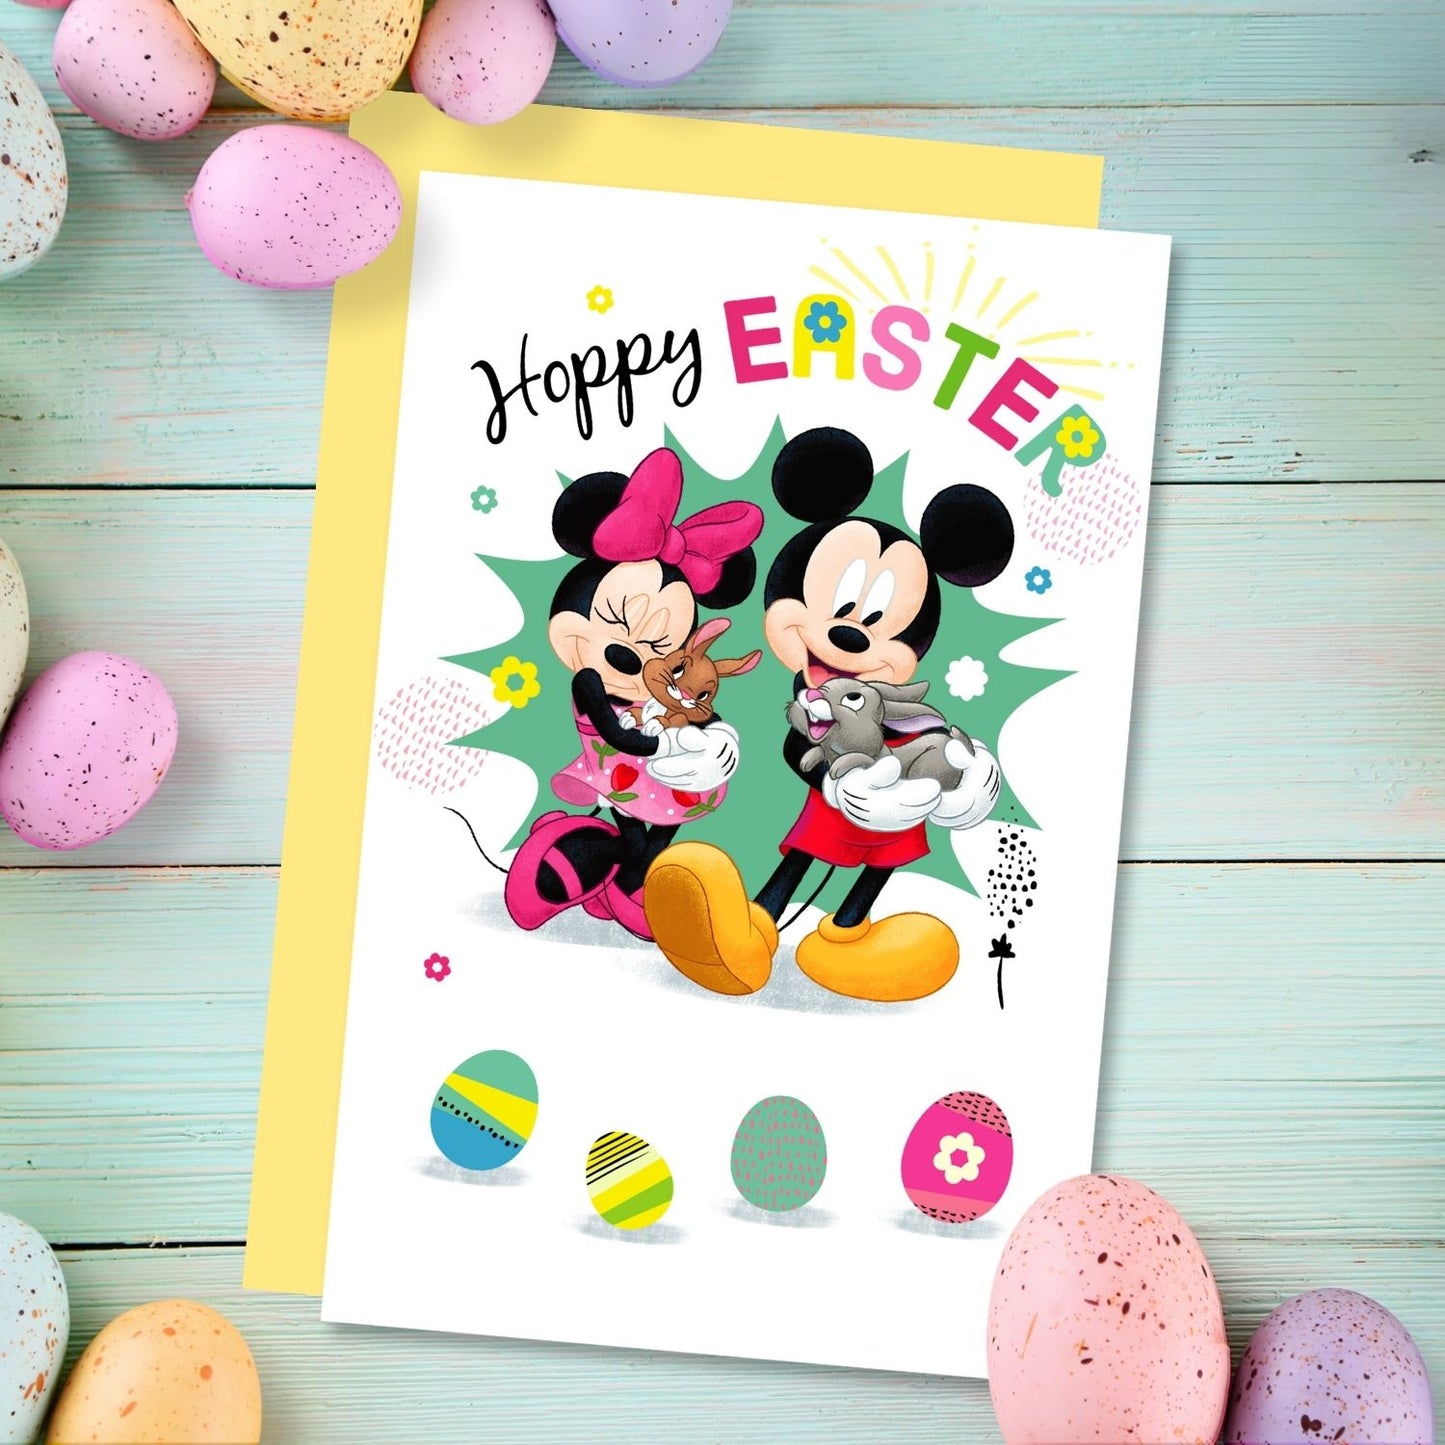 Disney Mickey Mouse & Minnie Hoppy Friend Easter Card Contemporary Greeting Card